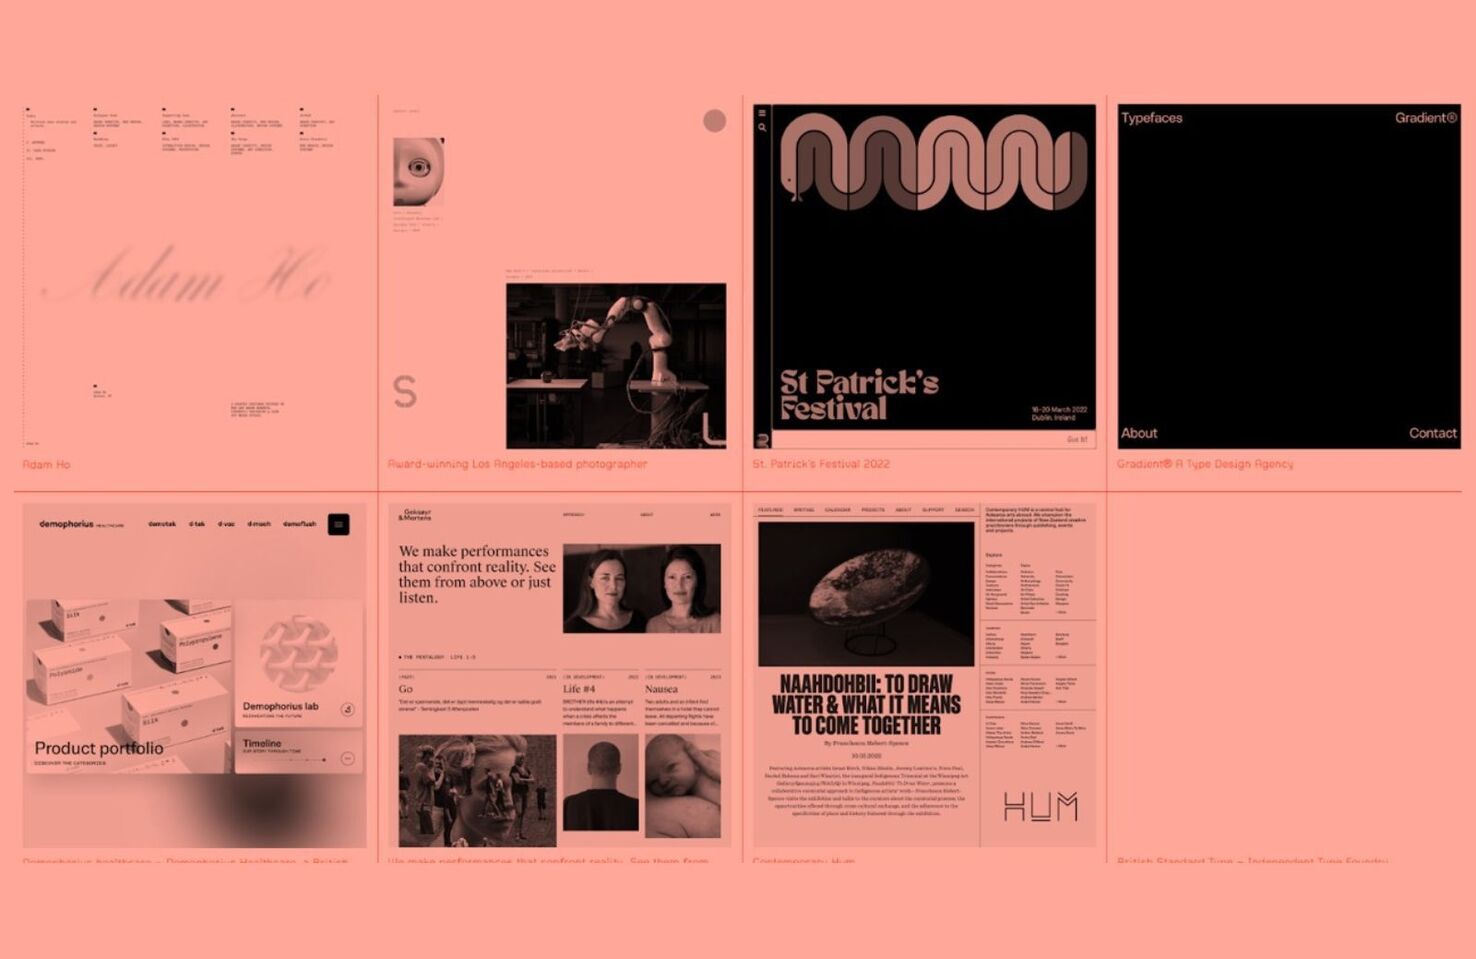 Collected.li Gives New Web Design Inspo With Every Visit 0d0dcdb45e6eb89b4dbd7379b0730ab6